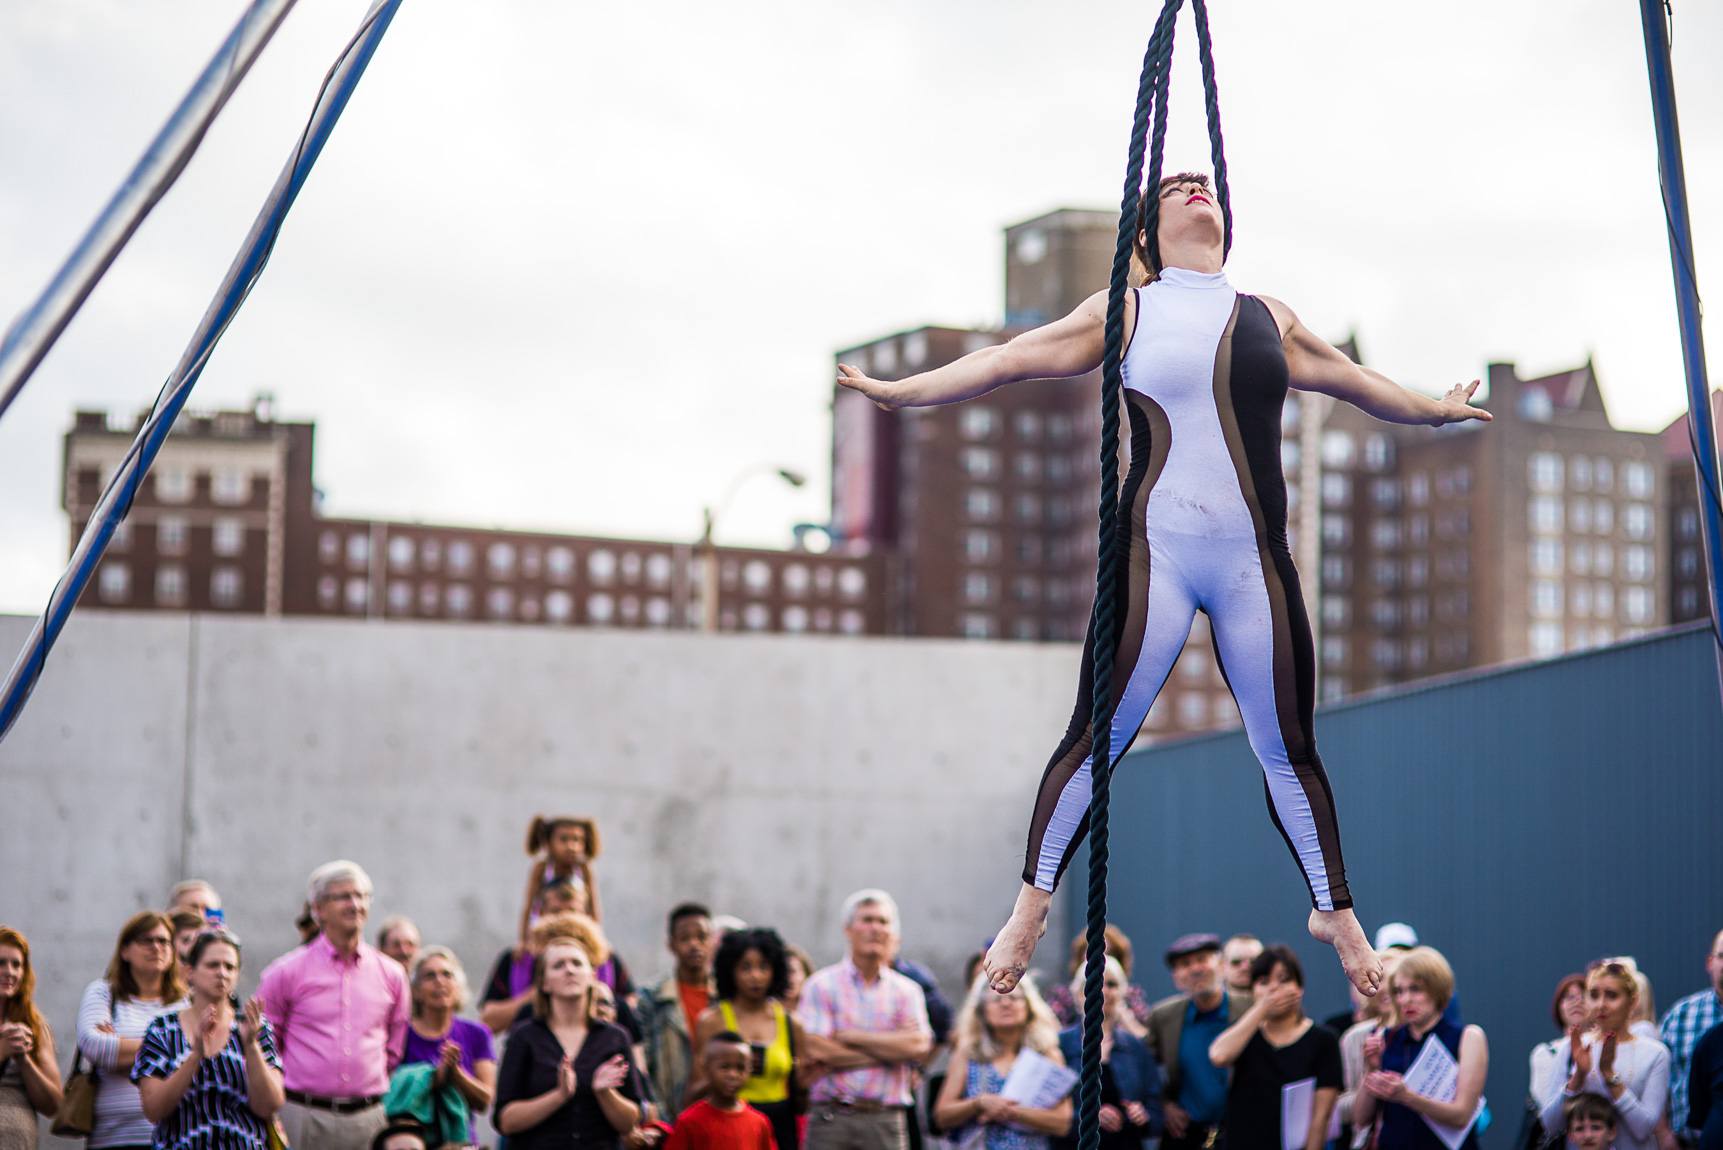 In the Courtyard, an acrobat floats in the air for a large audience with their arms and legs outstretched, the nape of their neck resting in a blue rope.